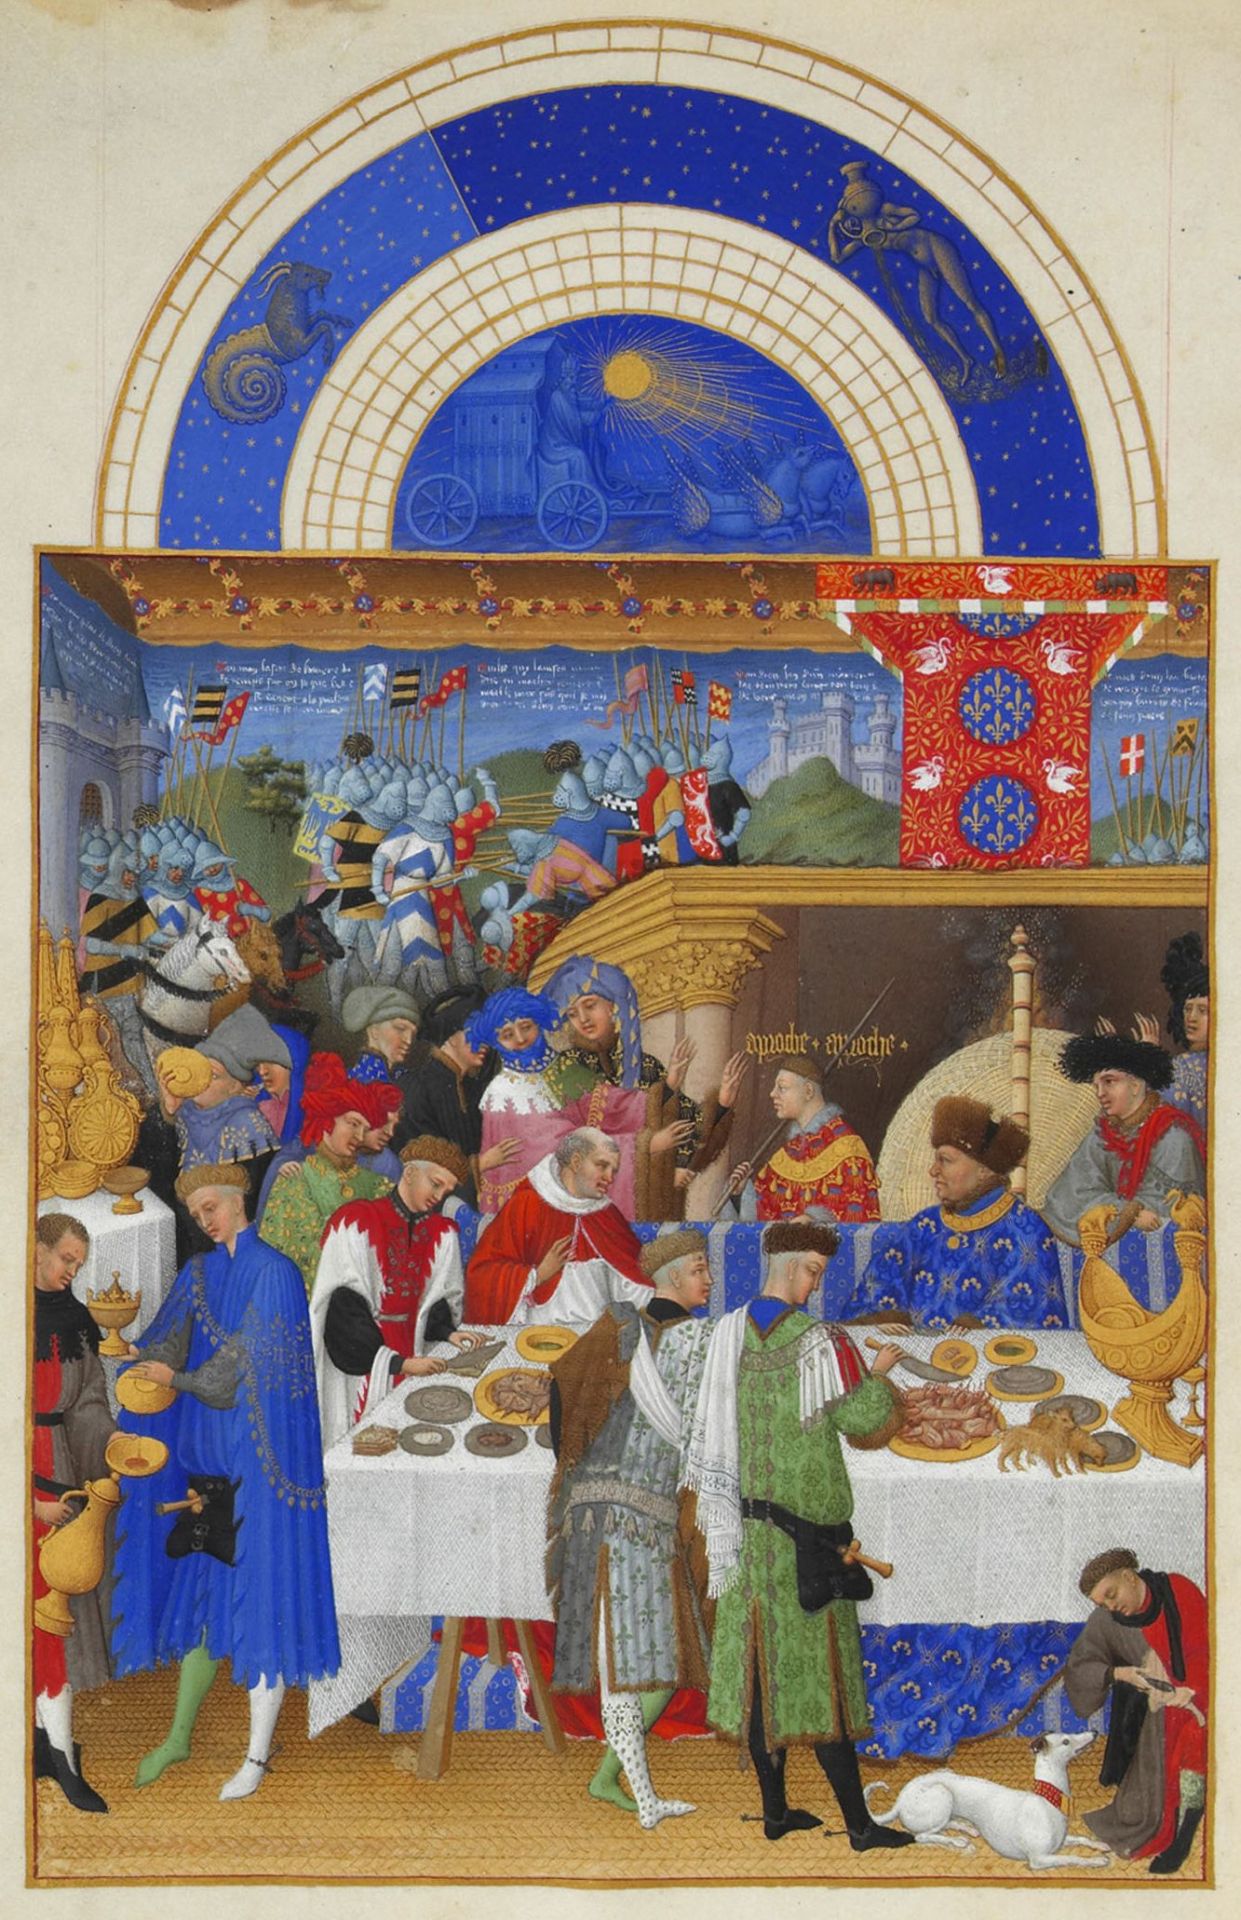 museumaddictsanonymous:
“Paul, Herman, and Jean Limbourg, January, The Duke of Berry at Table (from Très Riches Heures), 1411-16
”